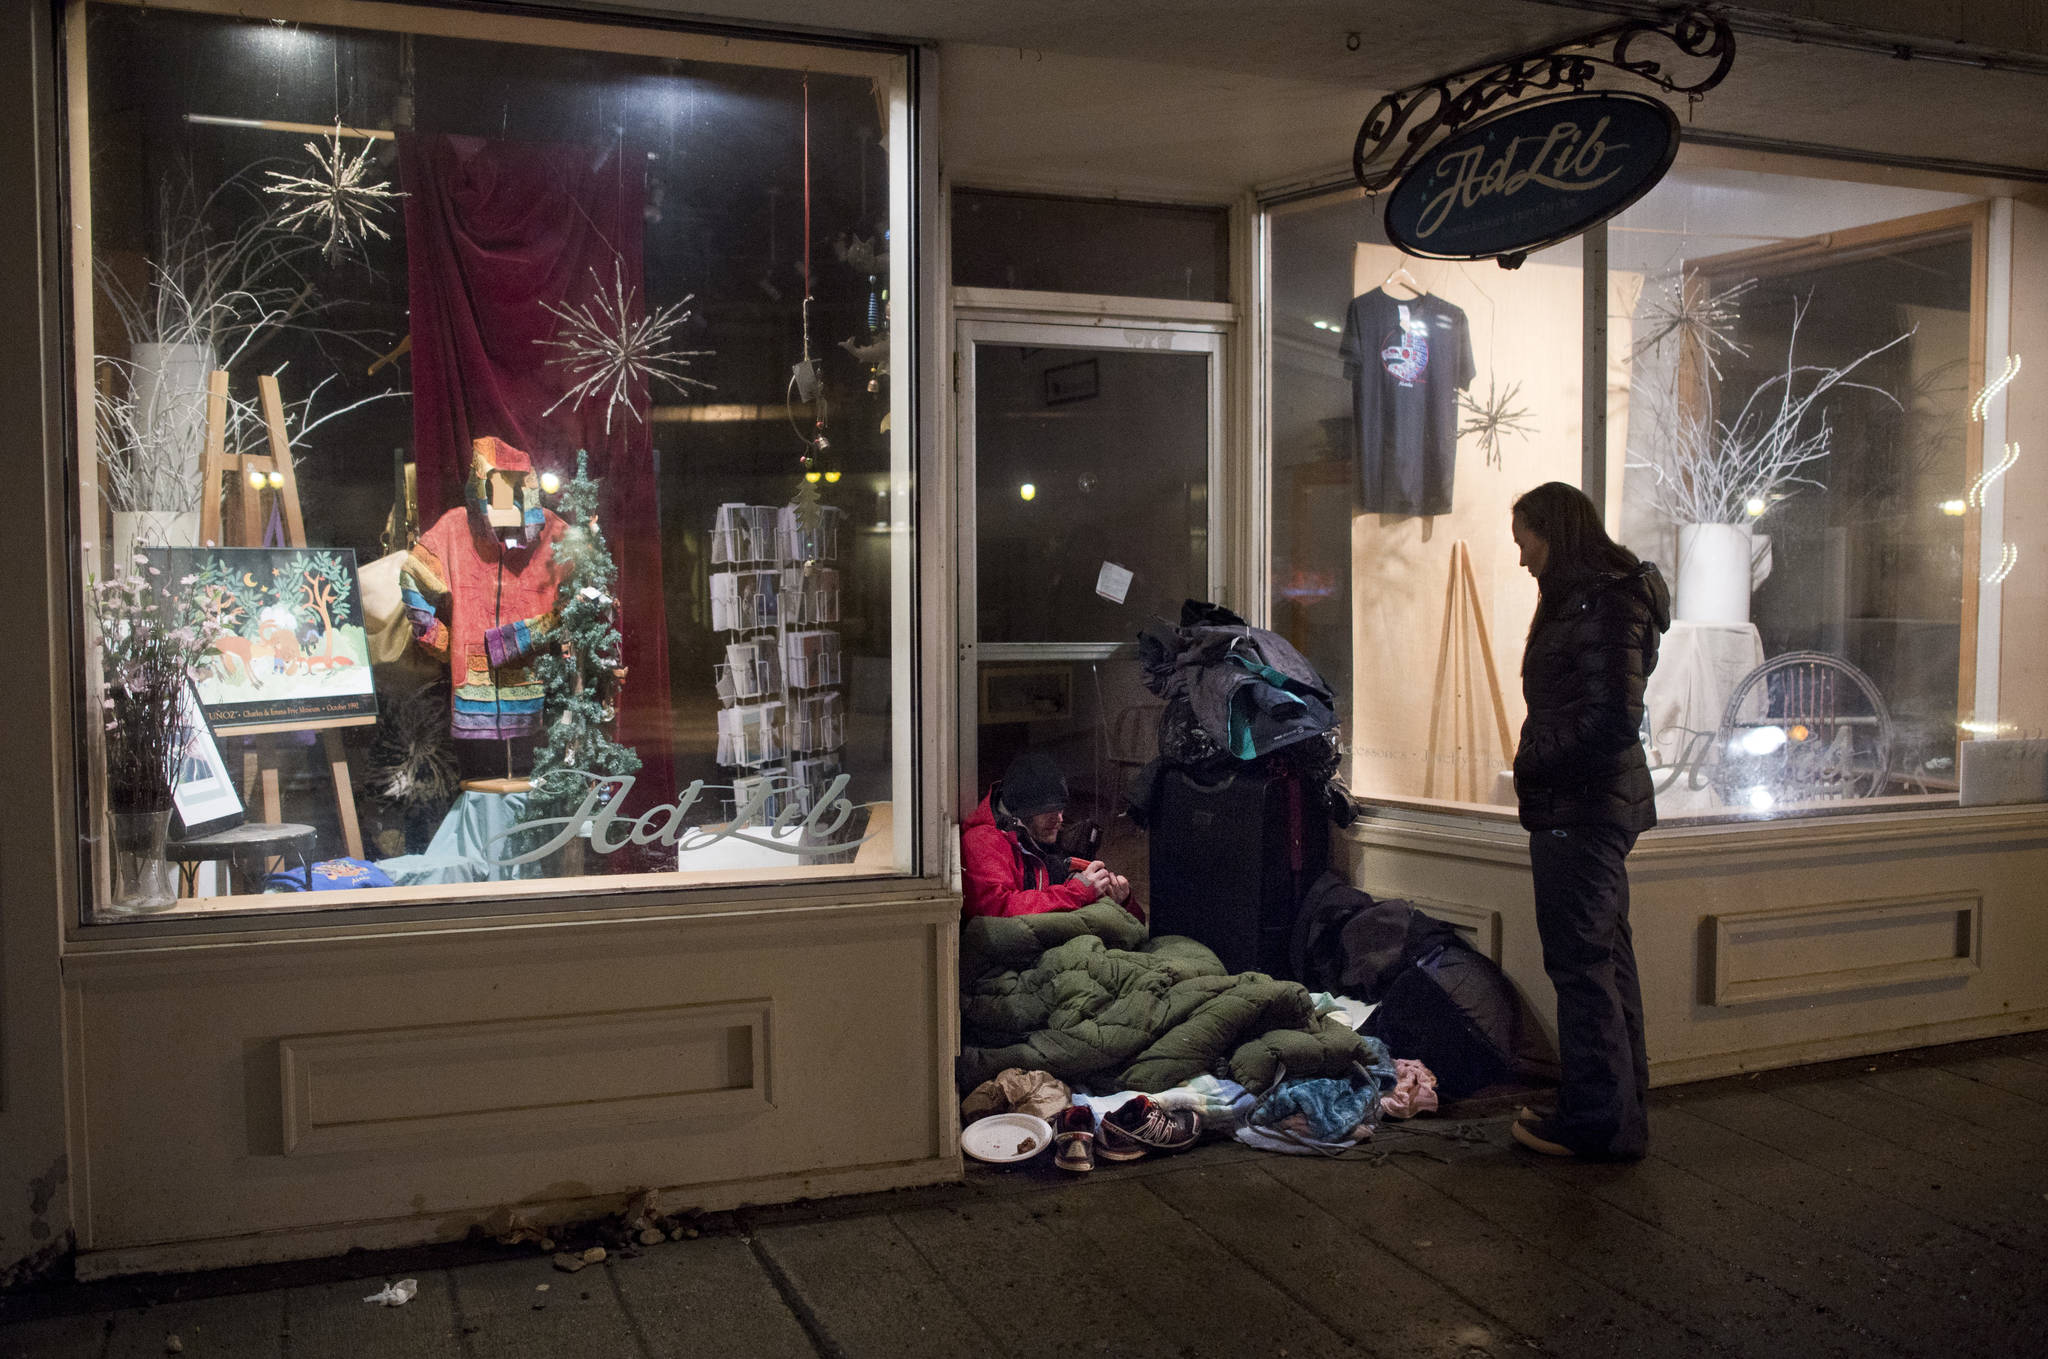 Chloe Abbott checks in with a homeless person camping in a business doorway on South Franklin Street on March 25, 2017. (Michael Penn | Juneau Empire)